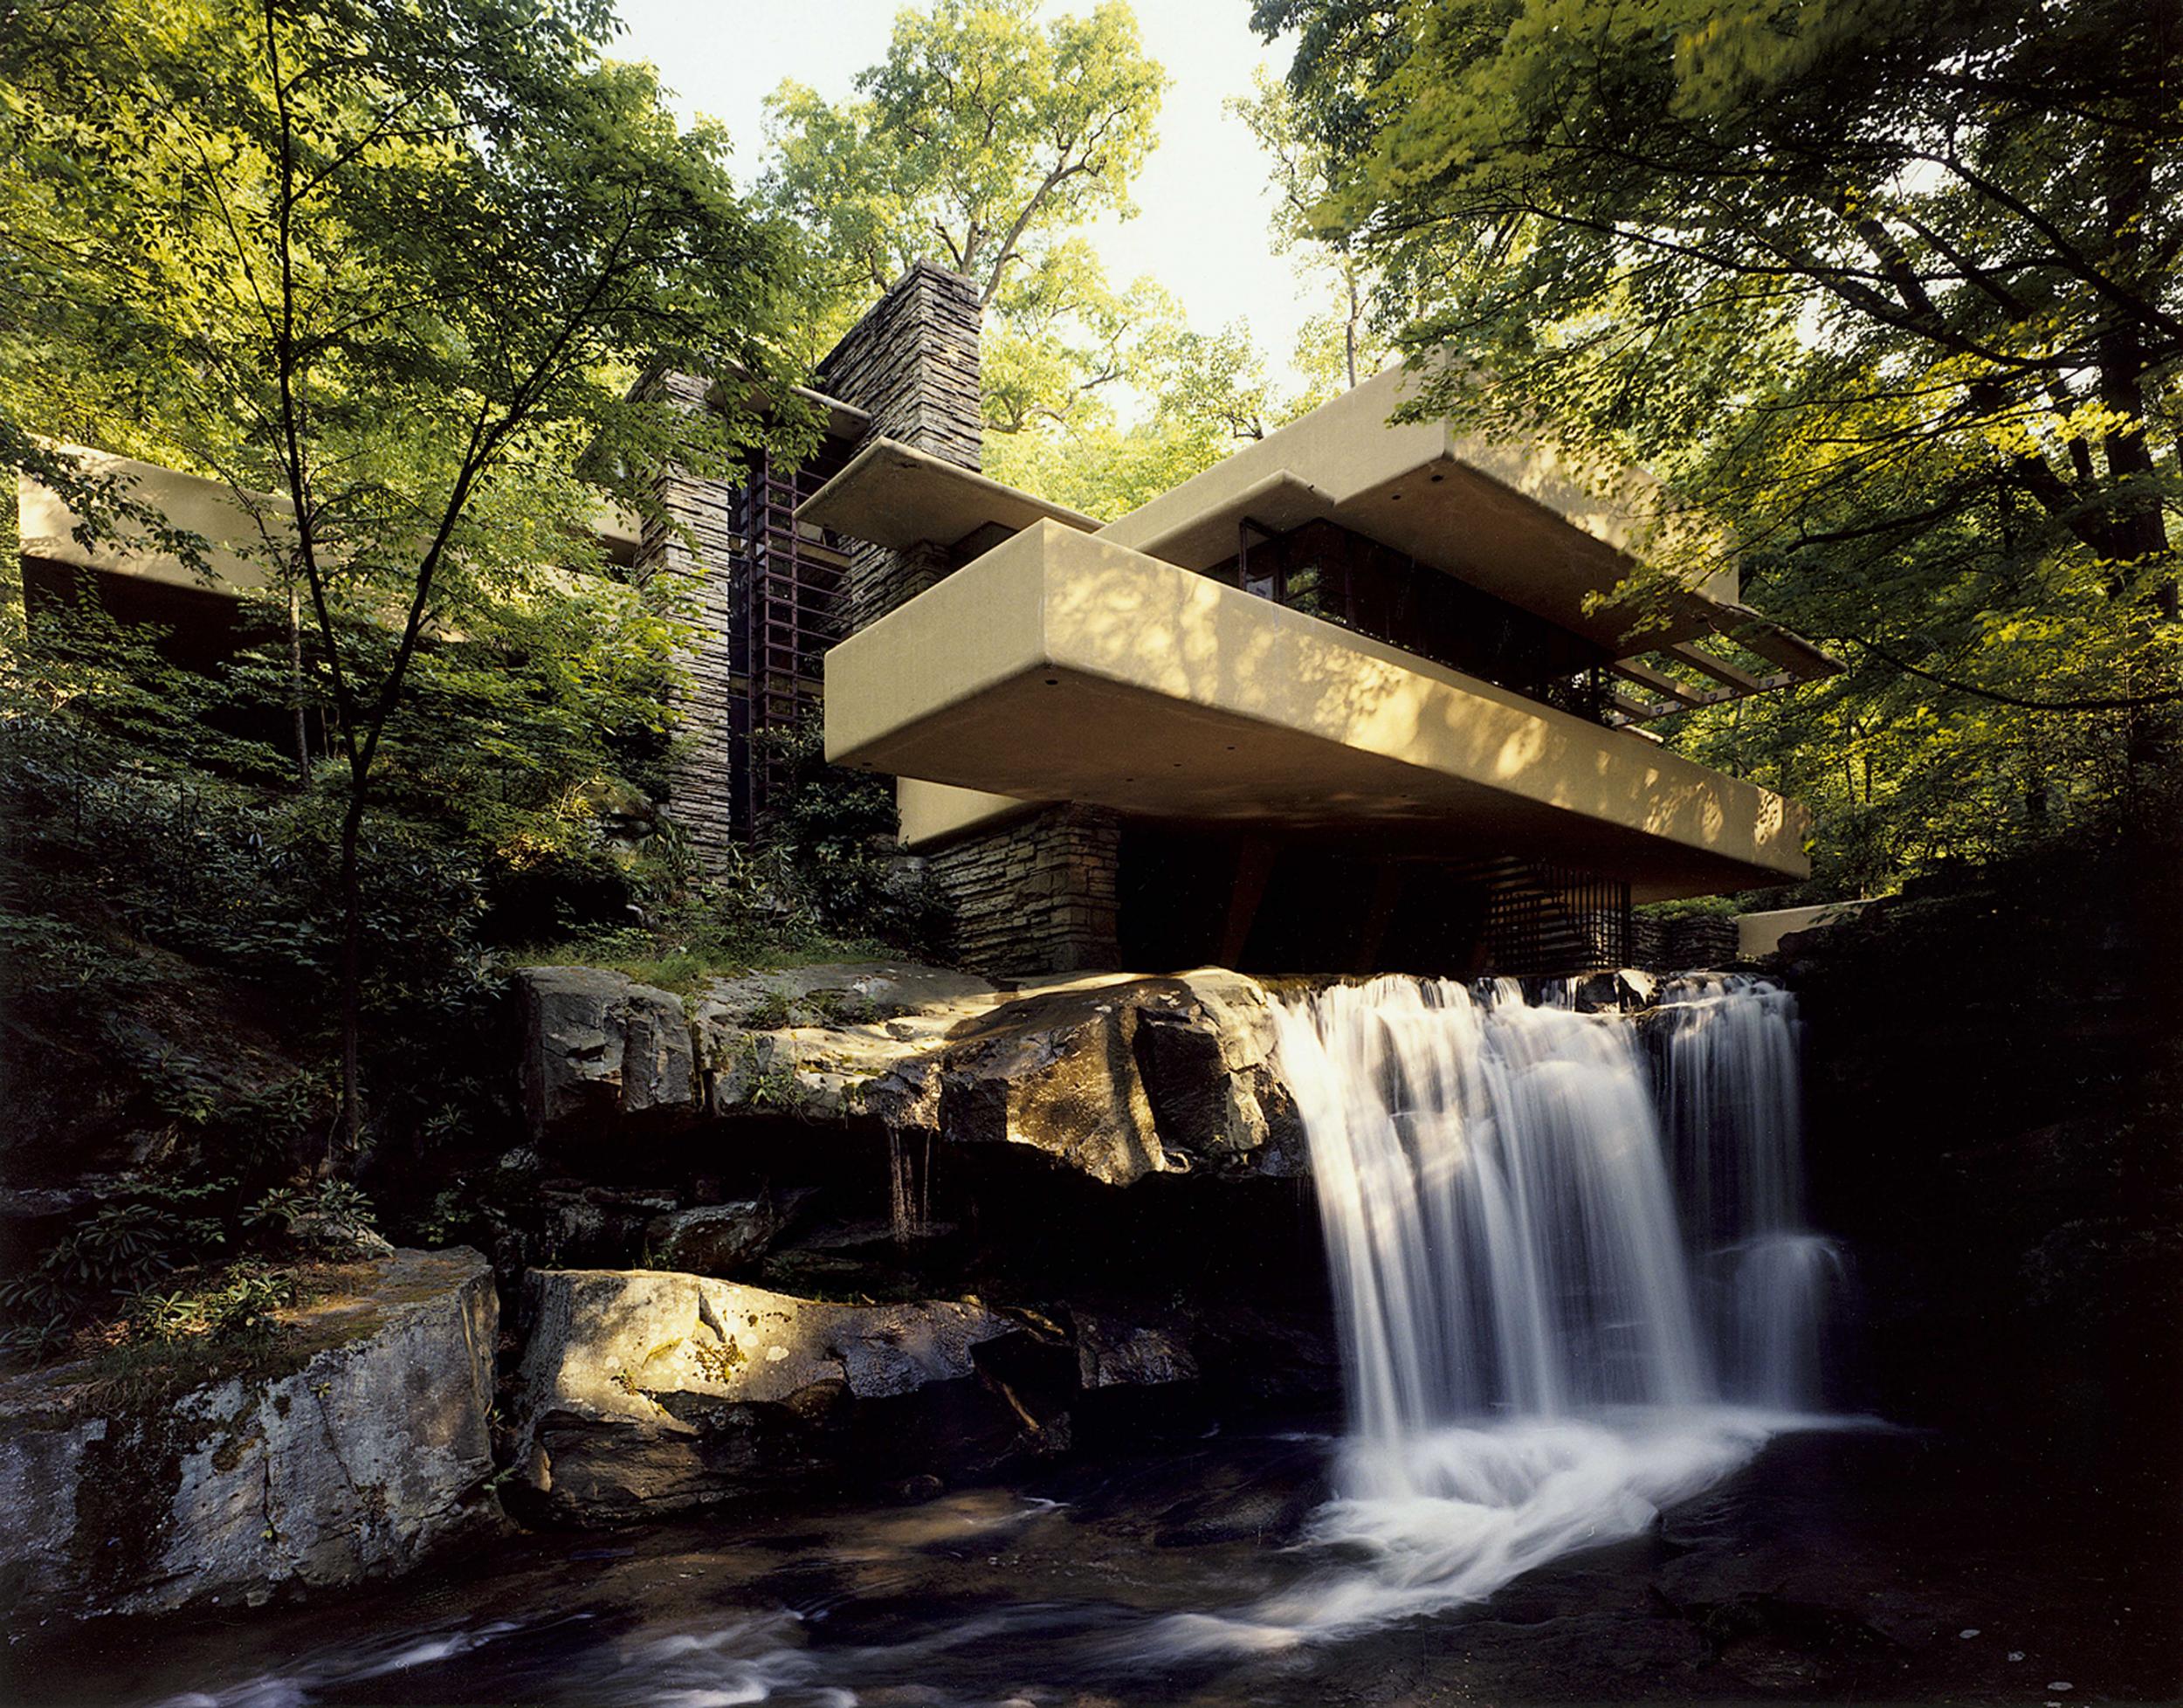 Fallingwater is one of Wright’s most famous buildings